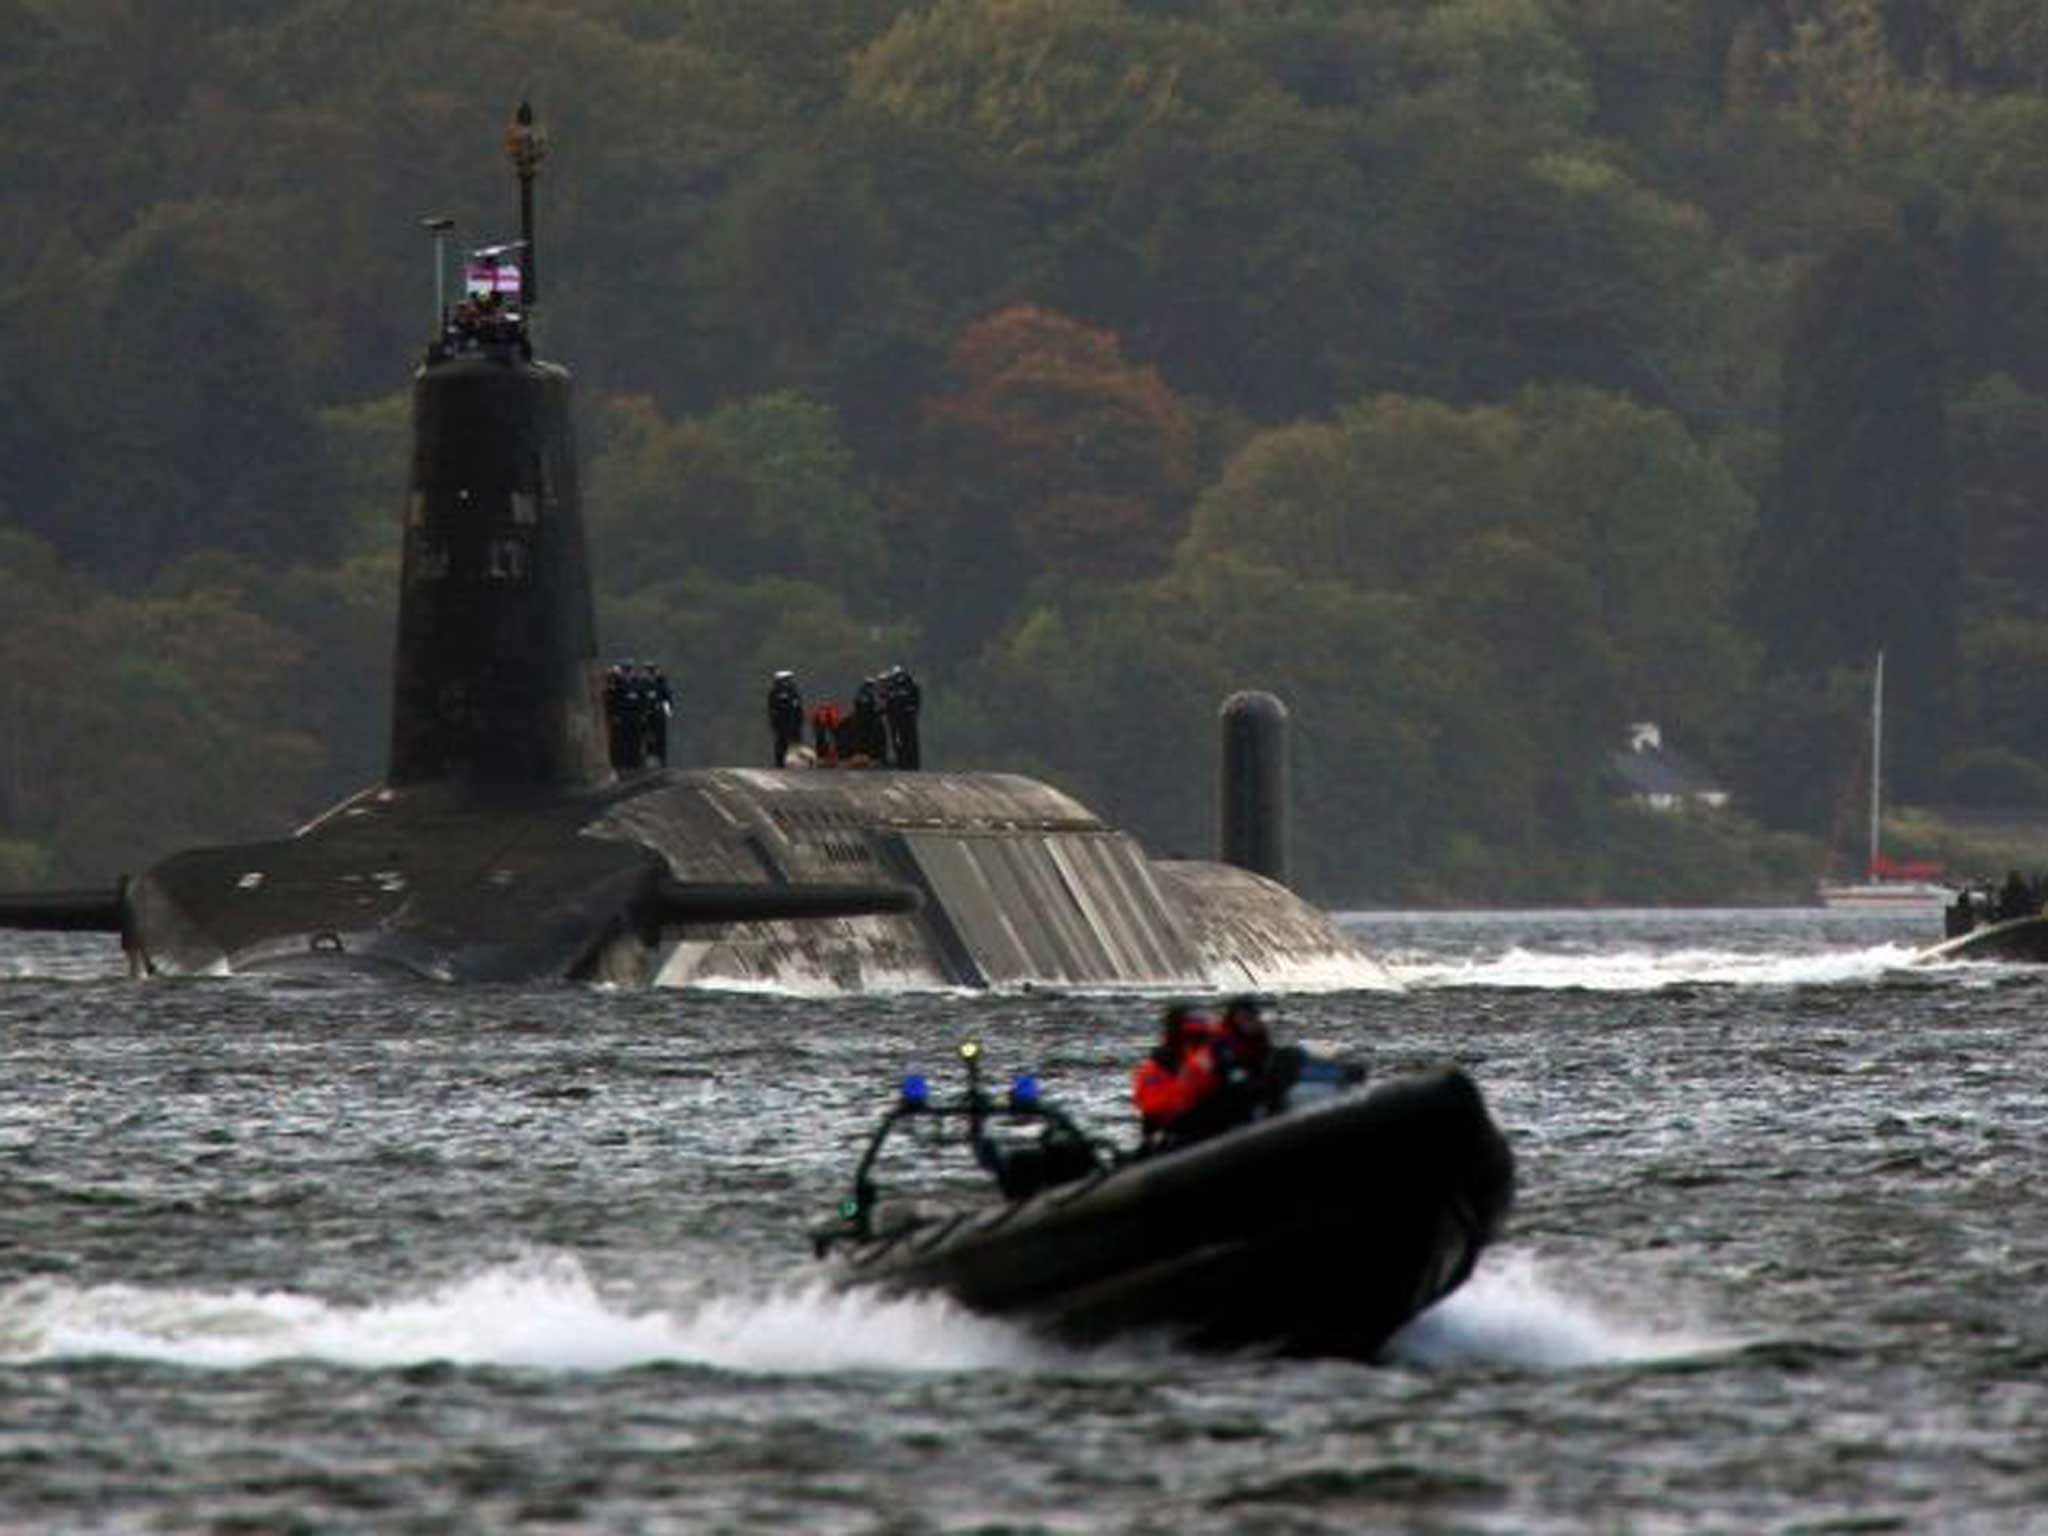 Rough waters: More docks would be needed to dismantle Trident subs